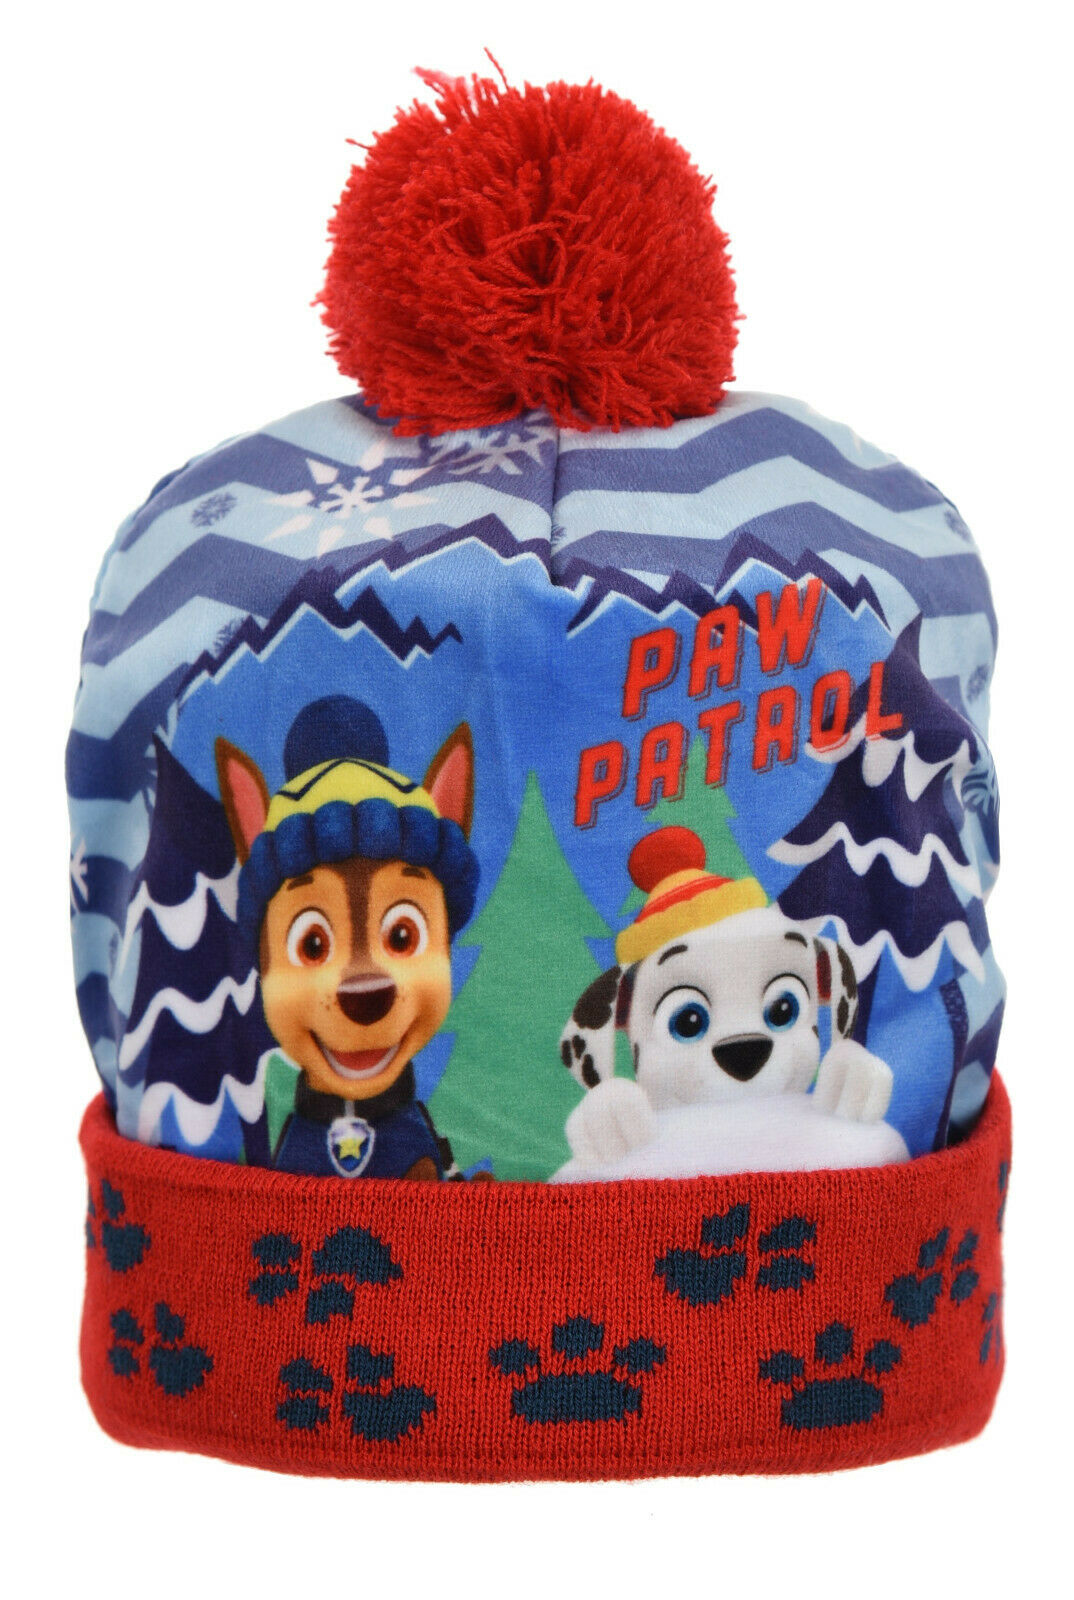 Children's Paw Patrol Red & Blue Bobble  Hat, Ages 2 To 10, Official Merchandise